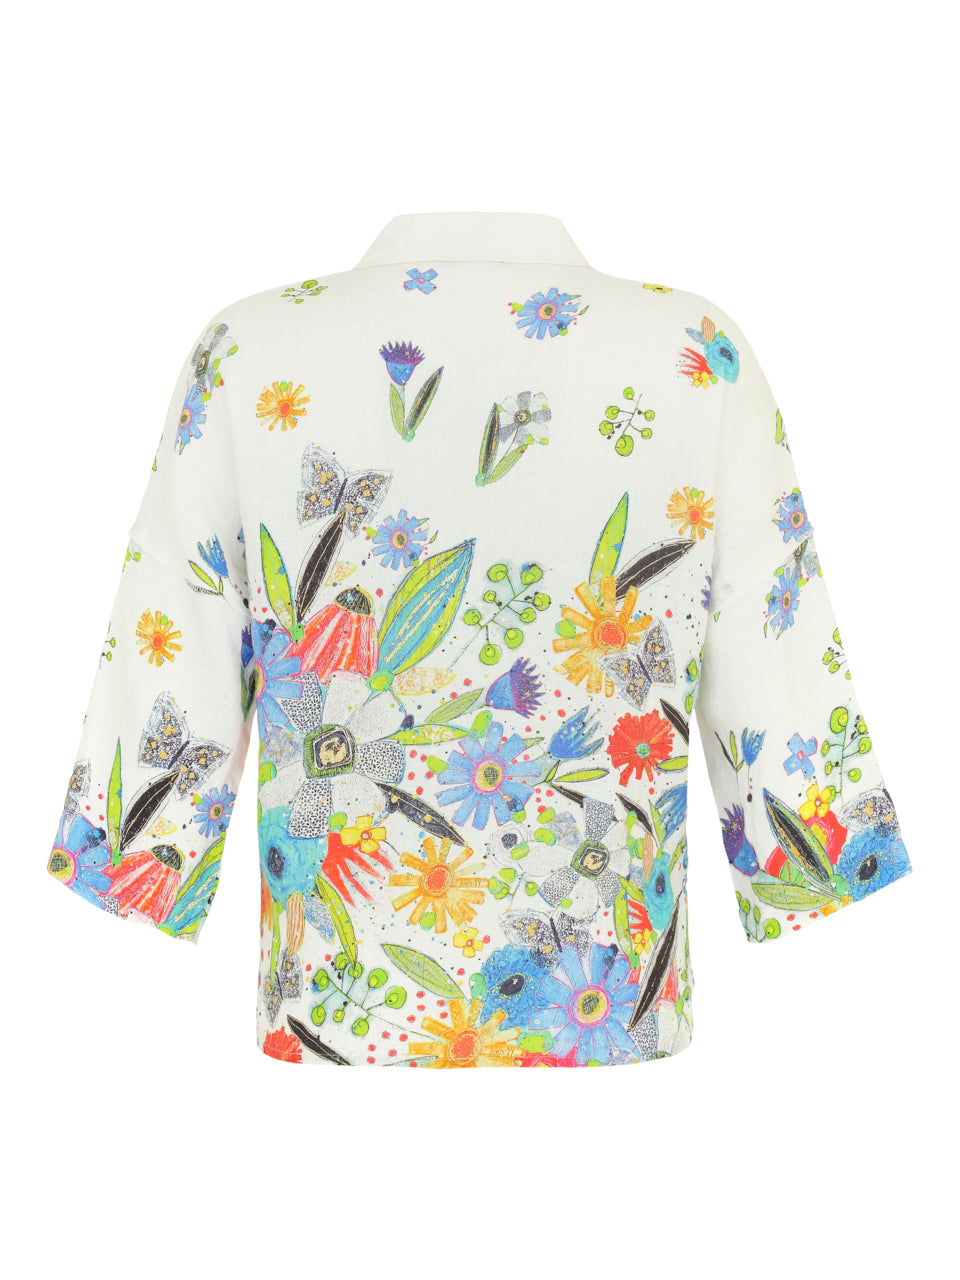 NEW BOUQUET COMING SOON SHIRT JACKET